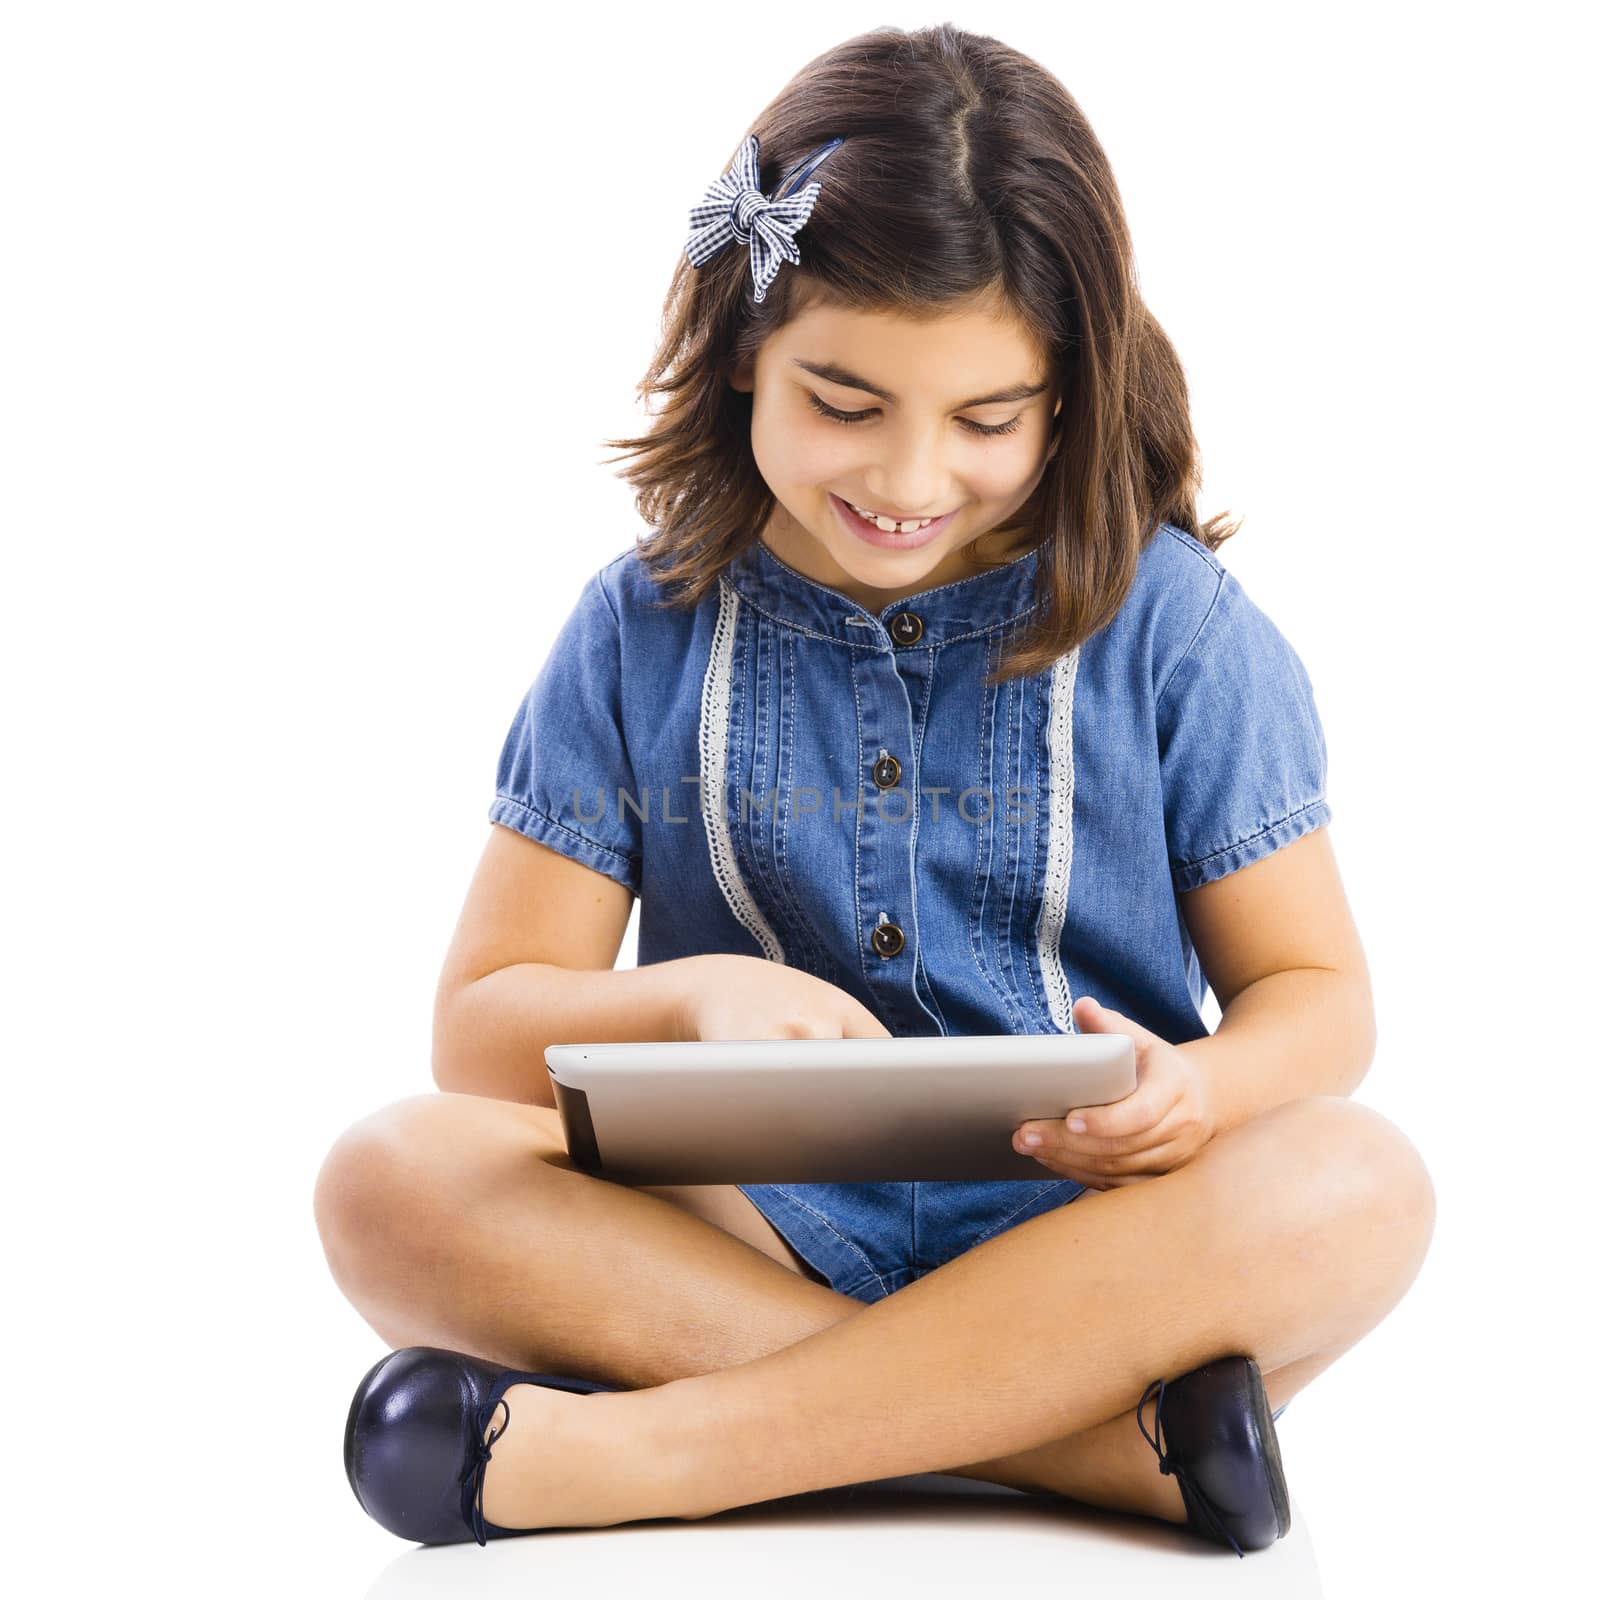 Young girl sitting on floor and using a tablet